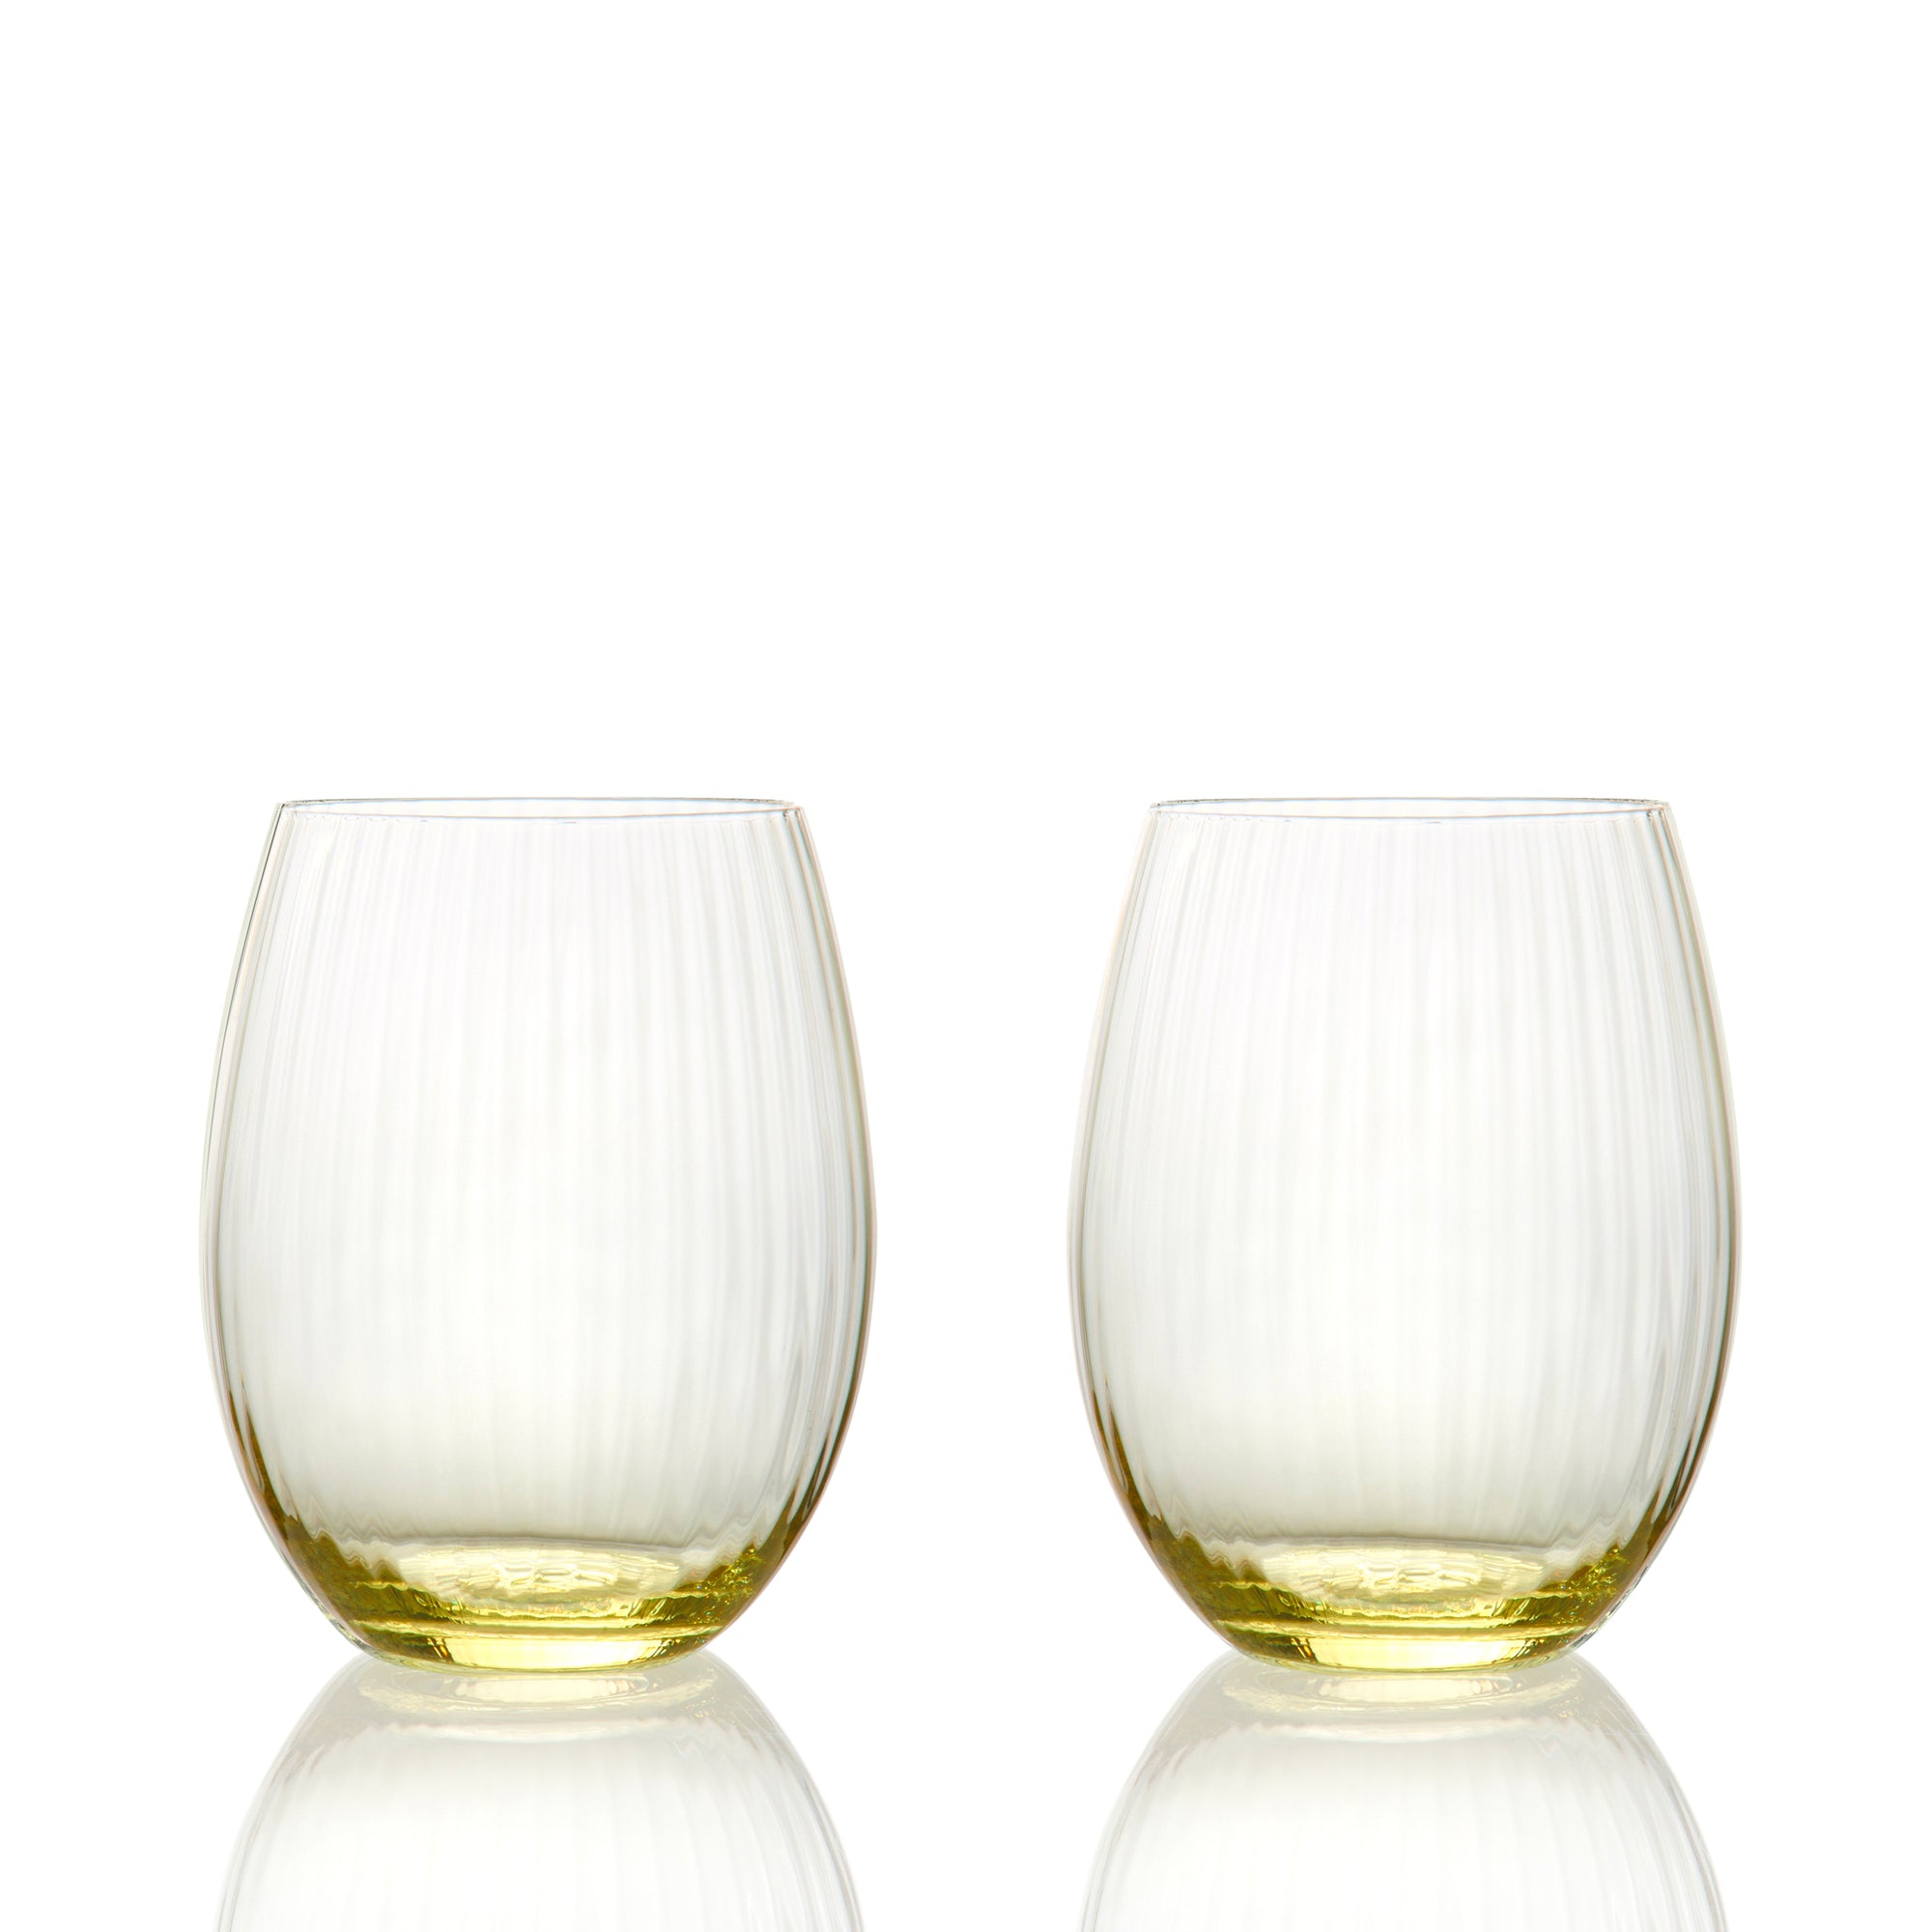 Quinn Citrine Yellow Crystal Tumblers or Stemless Wine Glasses Set of 2 from Caskata